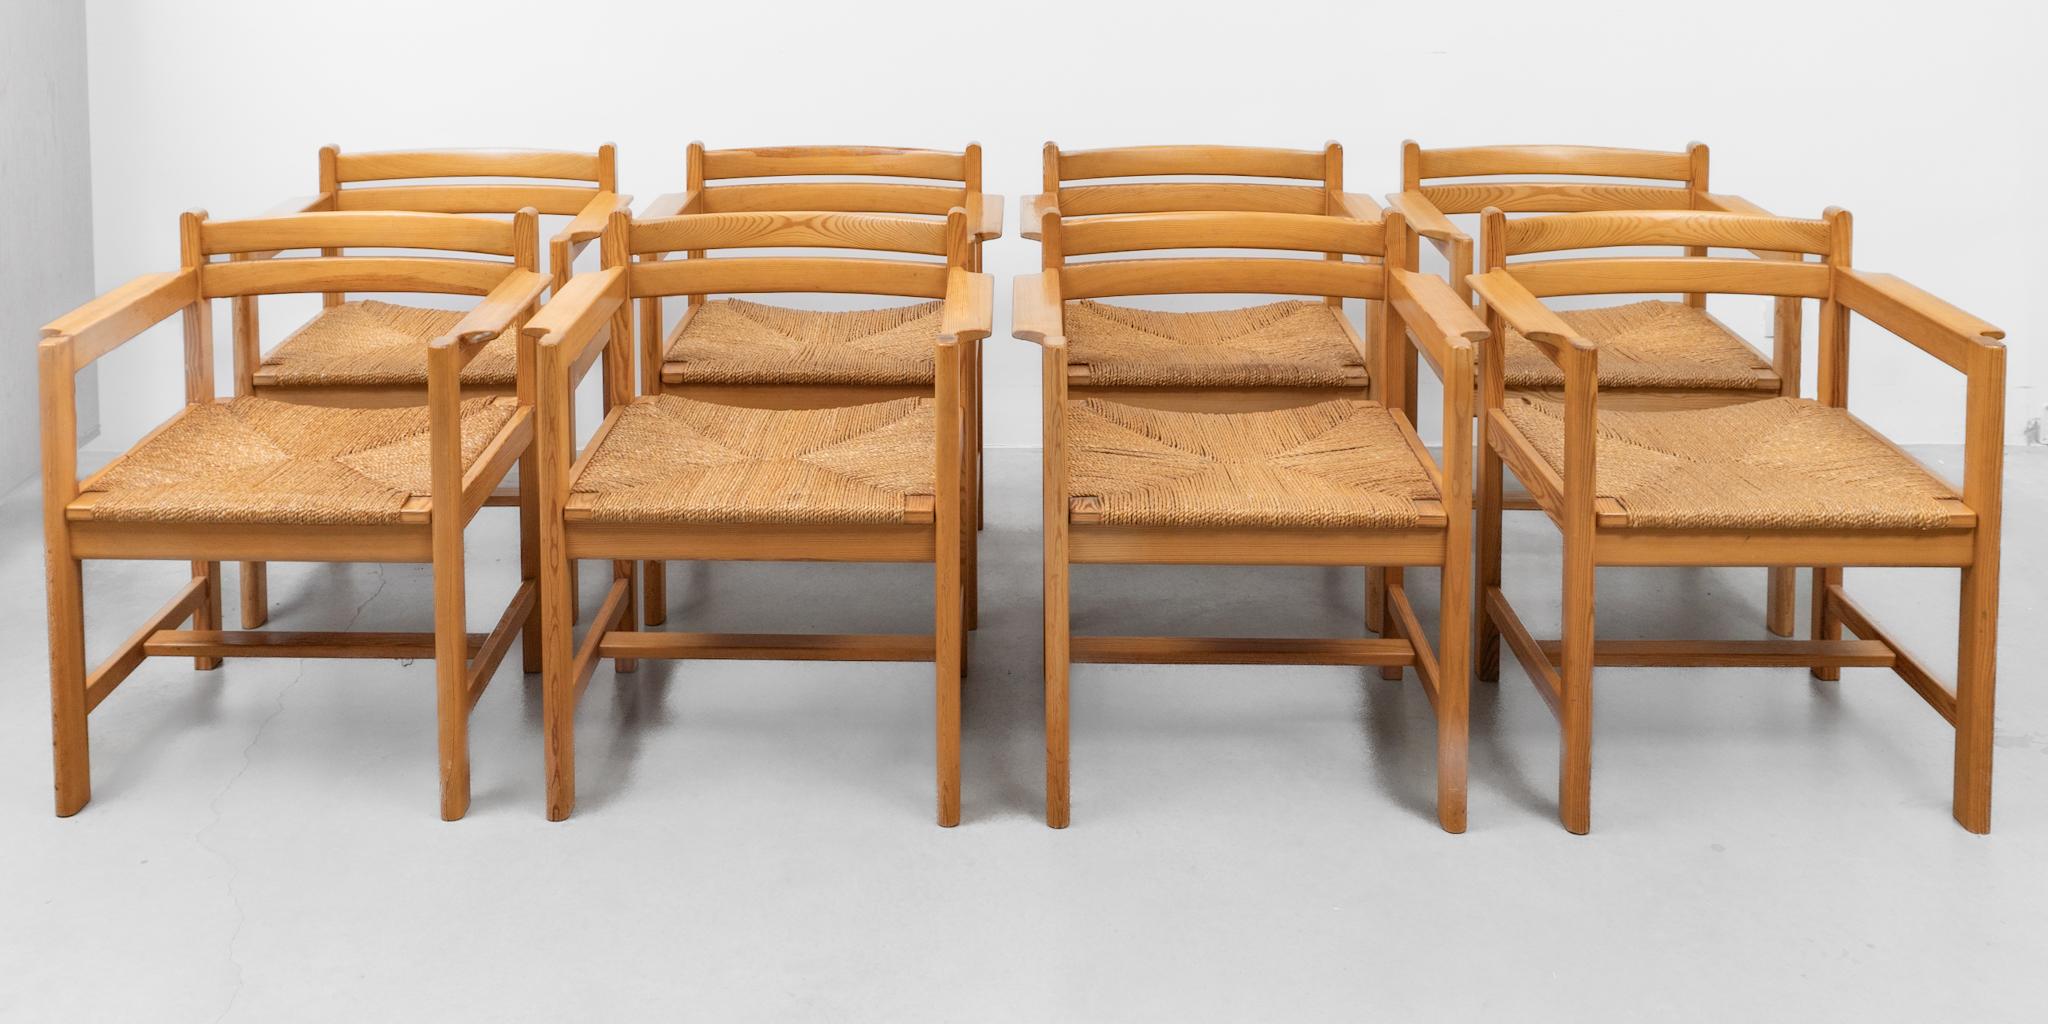 Eight Pine Arm Chairs by Børge Mogensen for AB Karl Andersson & Söner Sweden For Sale 4